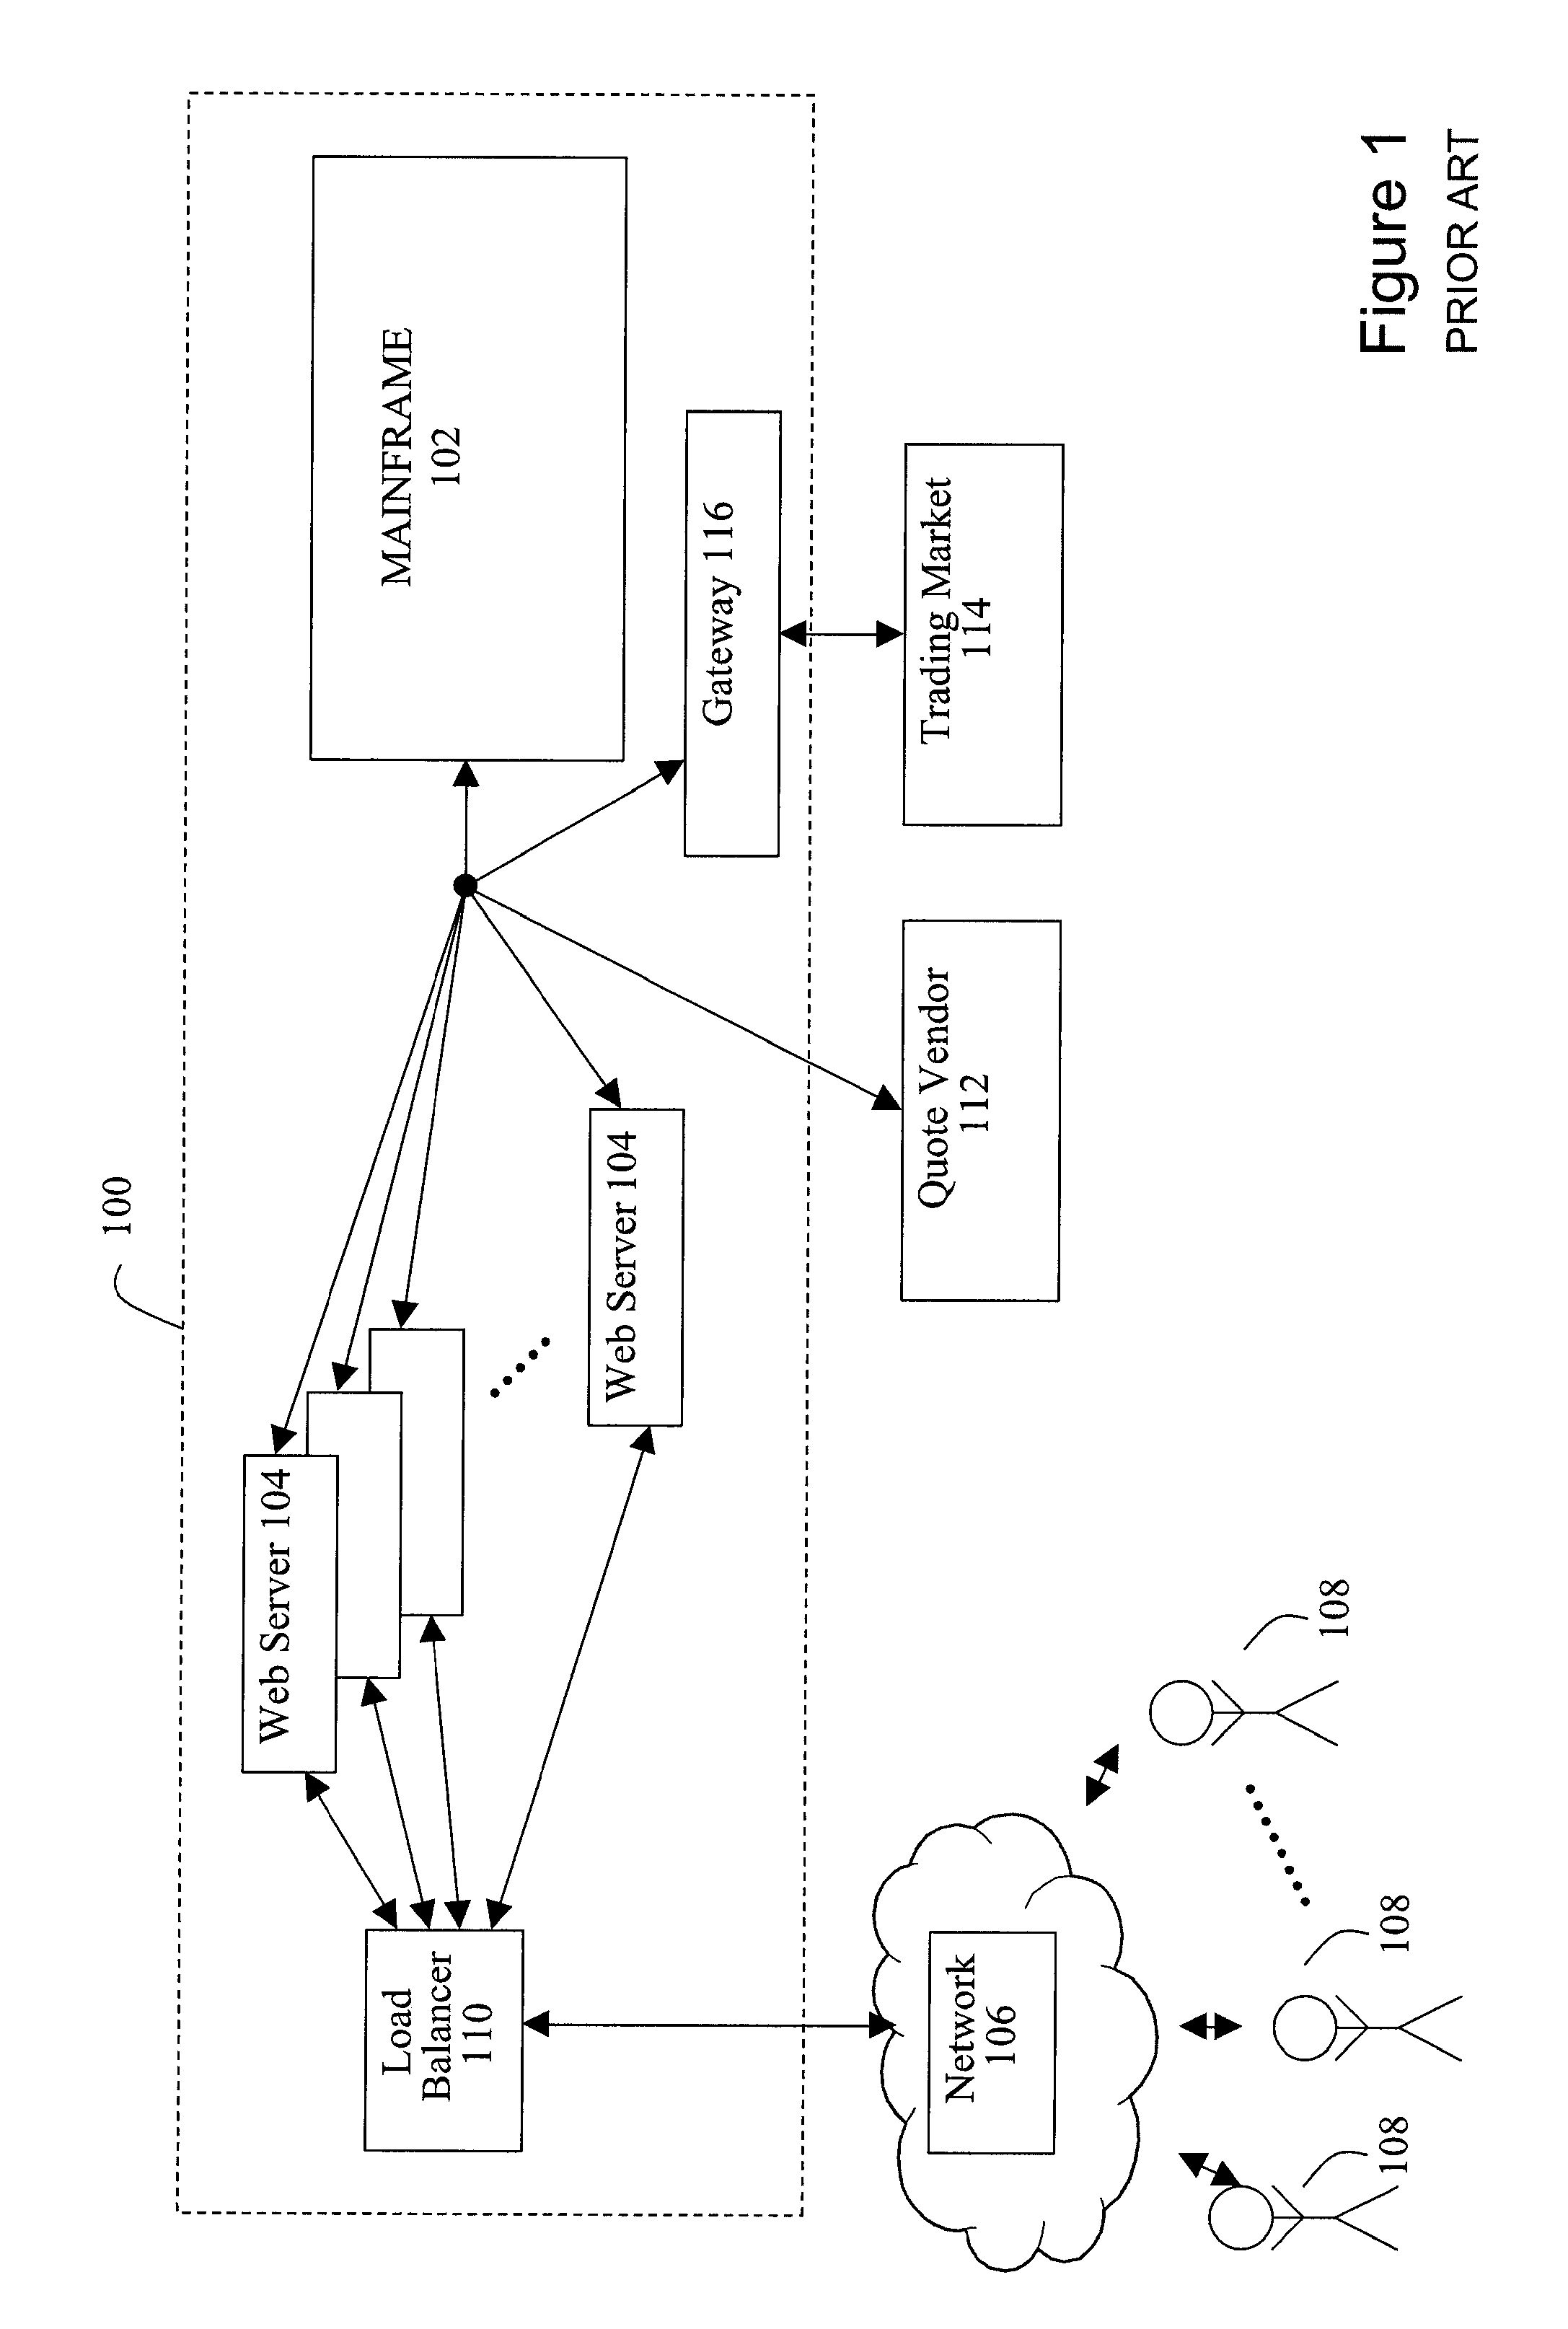 System and Method for the Automated Brokerage of Financial Instruments